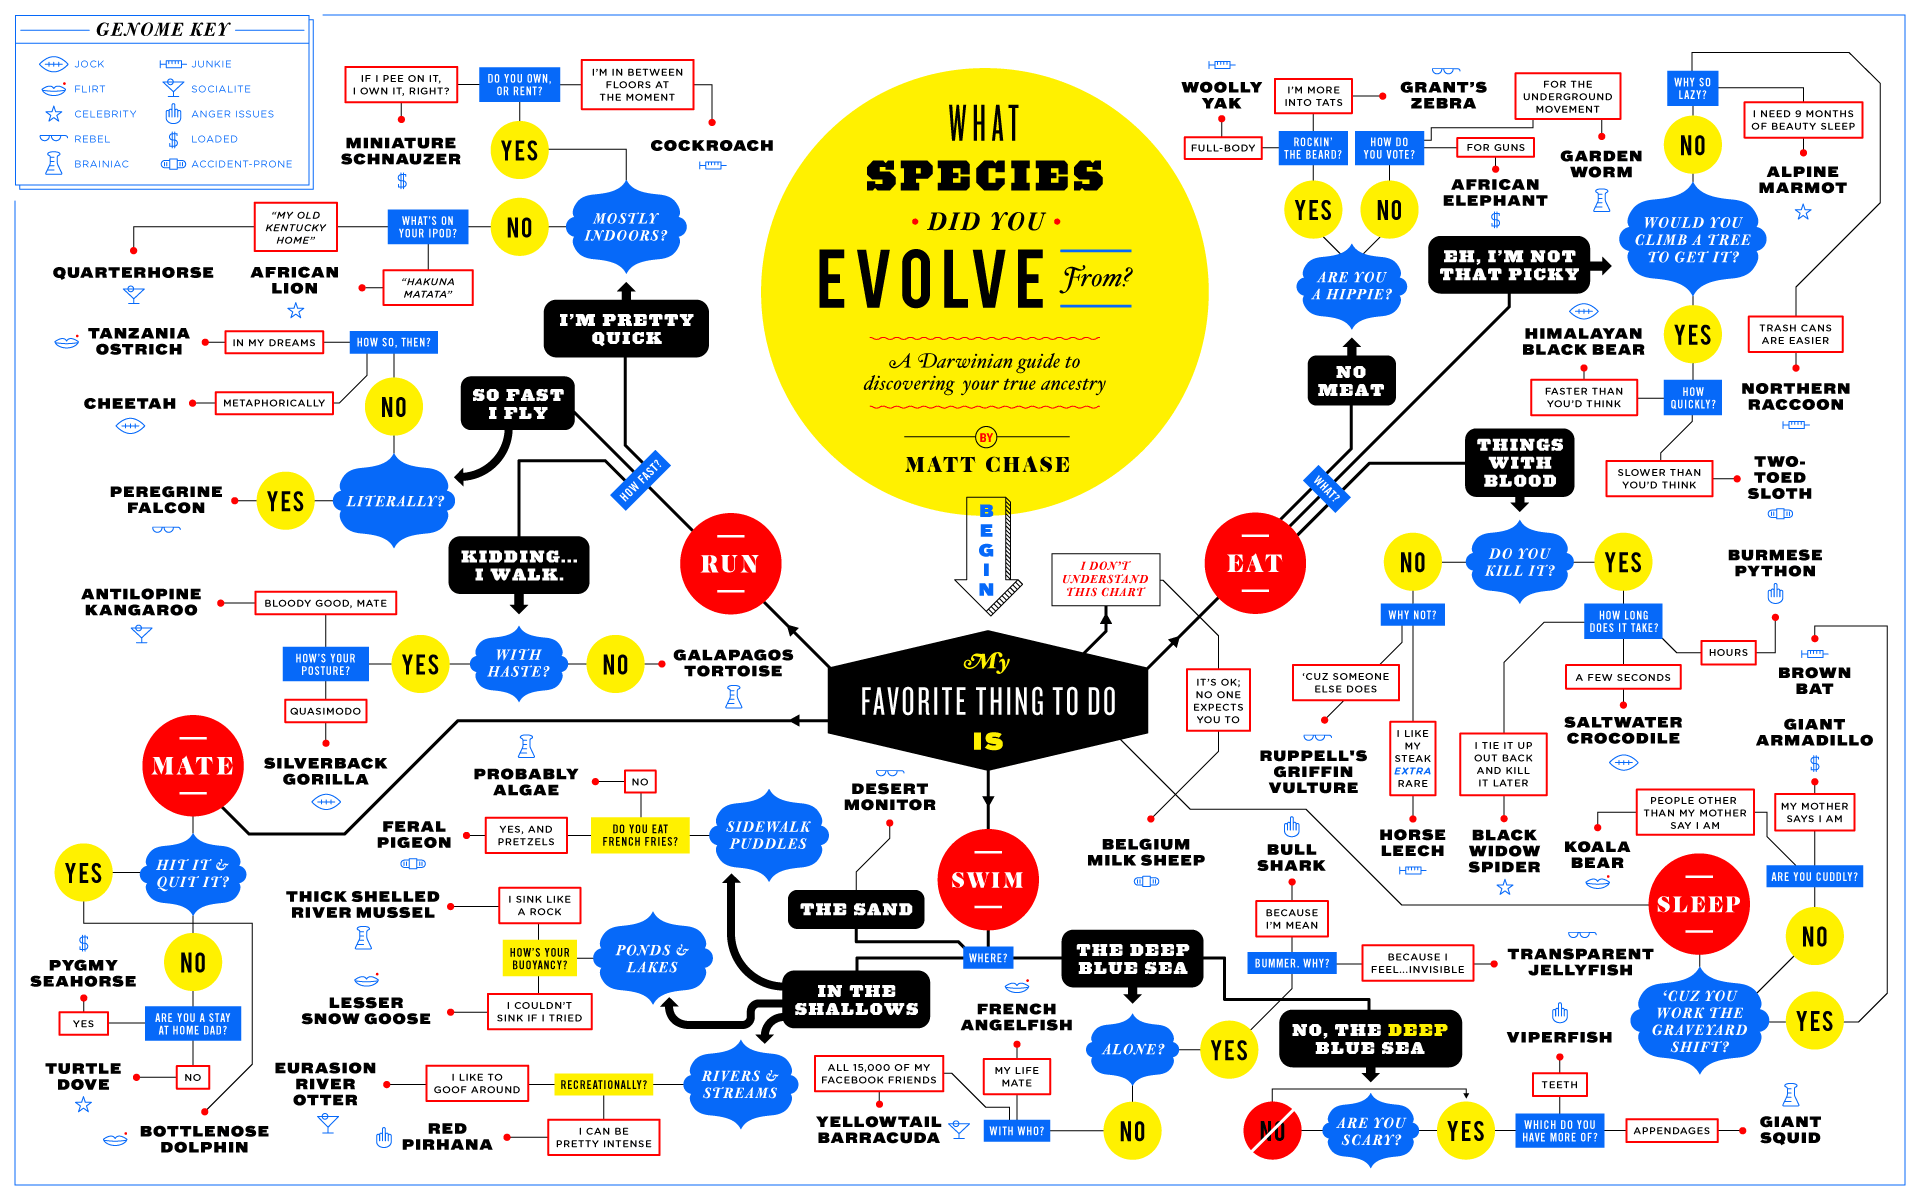 What species did you evolve from?